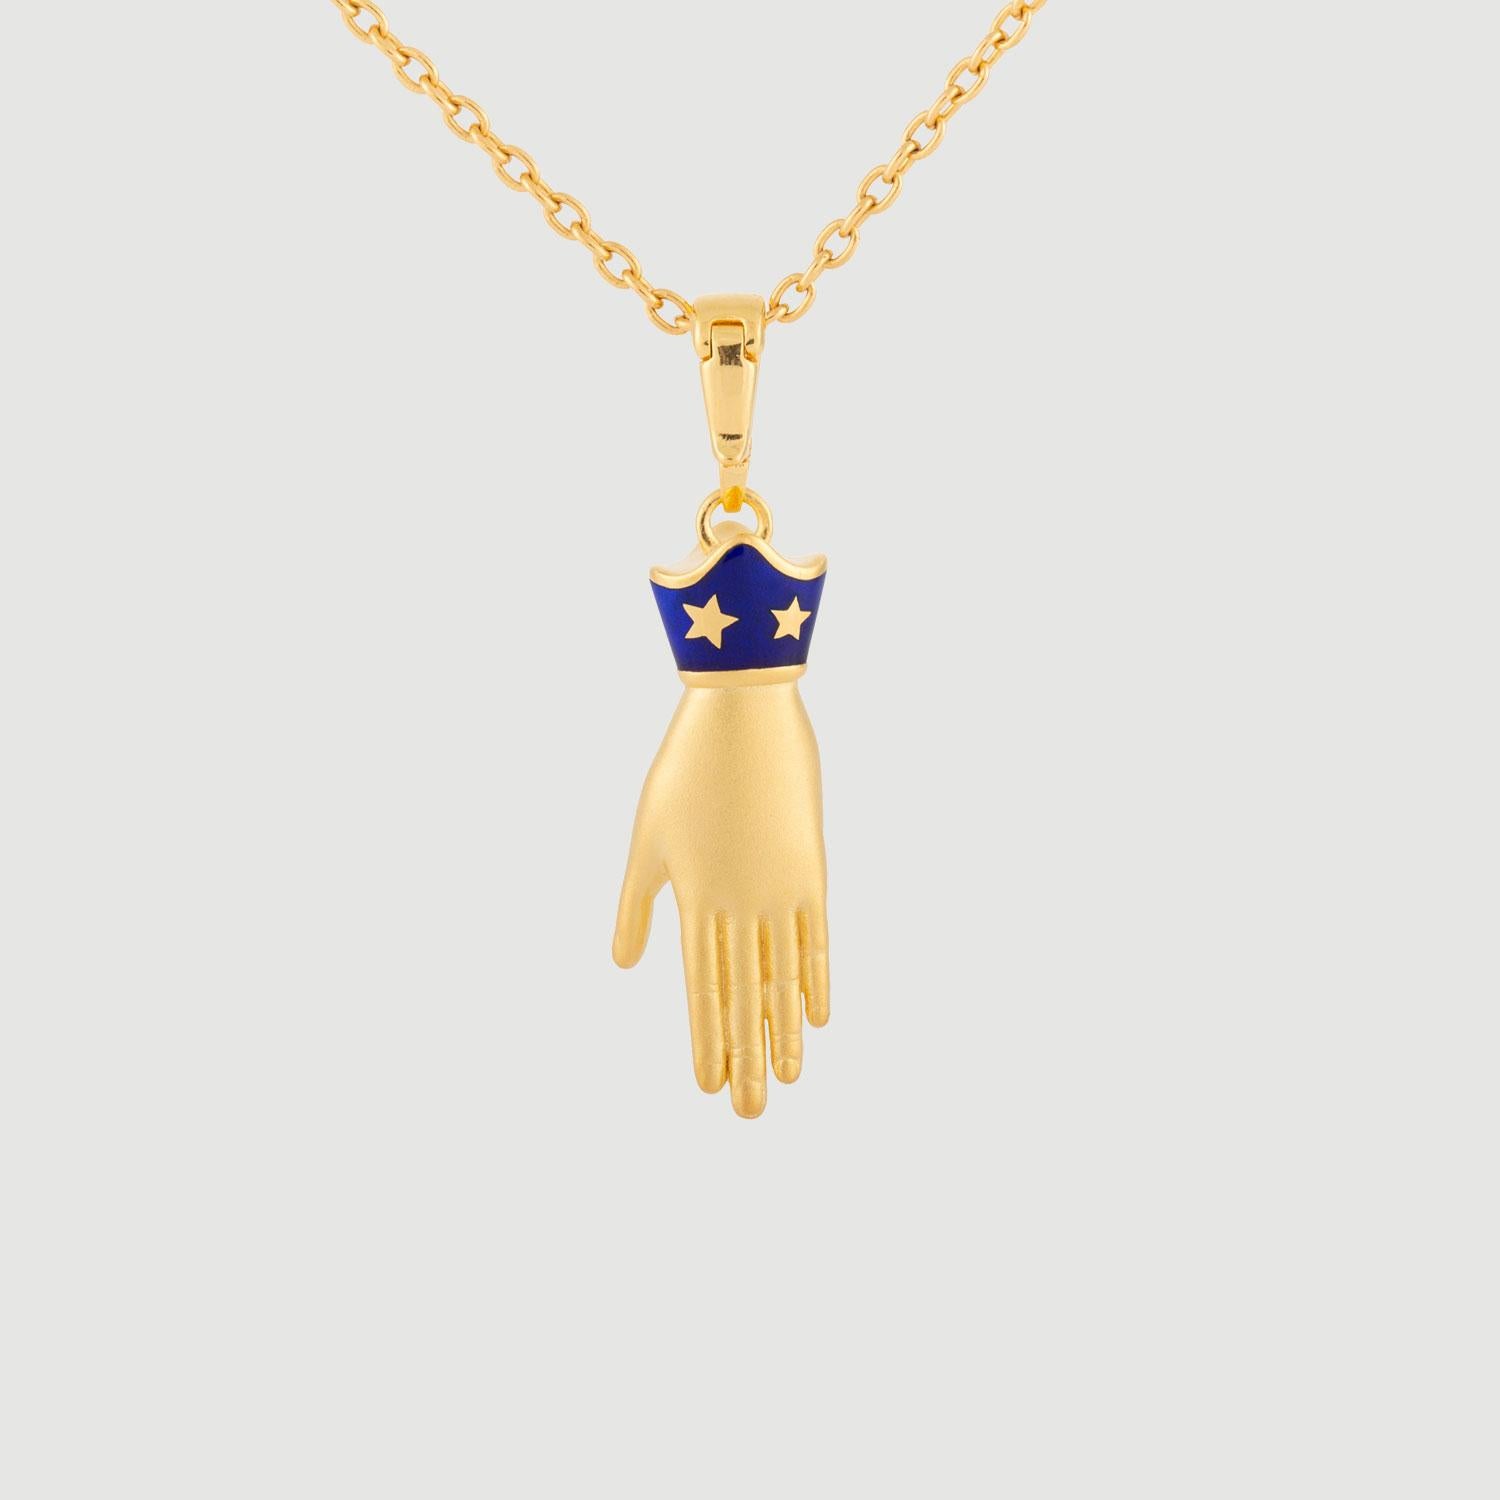 The Heart in Hand necklace pendant is a symbol of a heart in an open palm, and it symbolizes charity, given from the heart and one of the most commonly depicted Mexican Milagros. 

Milagros are charms or talismans used for requests, for protection,